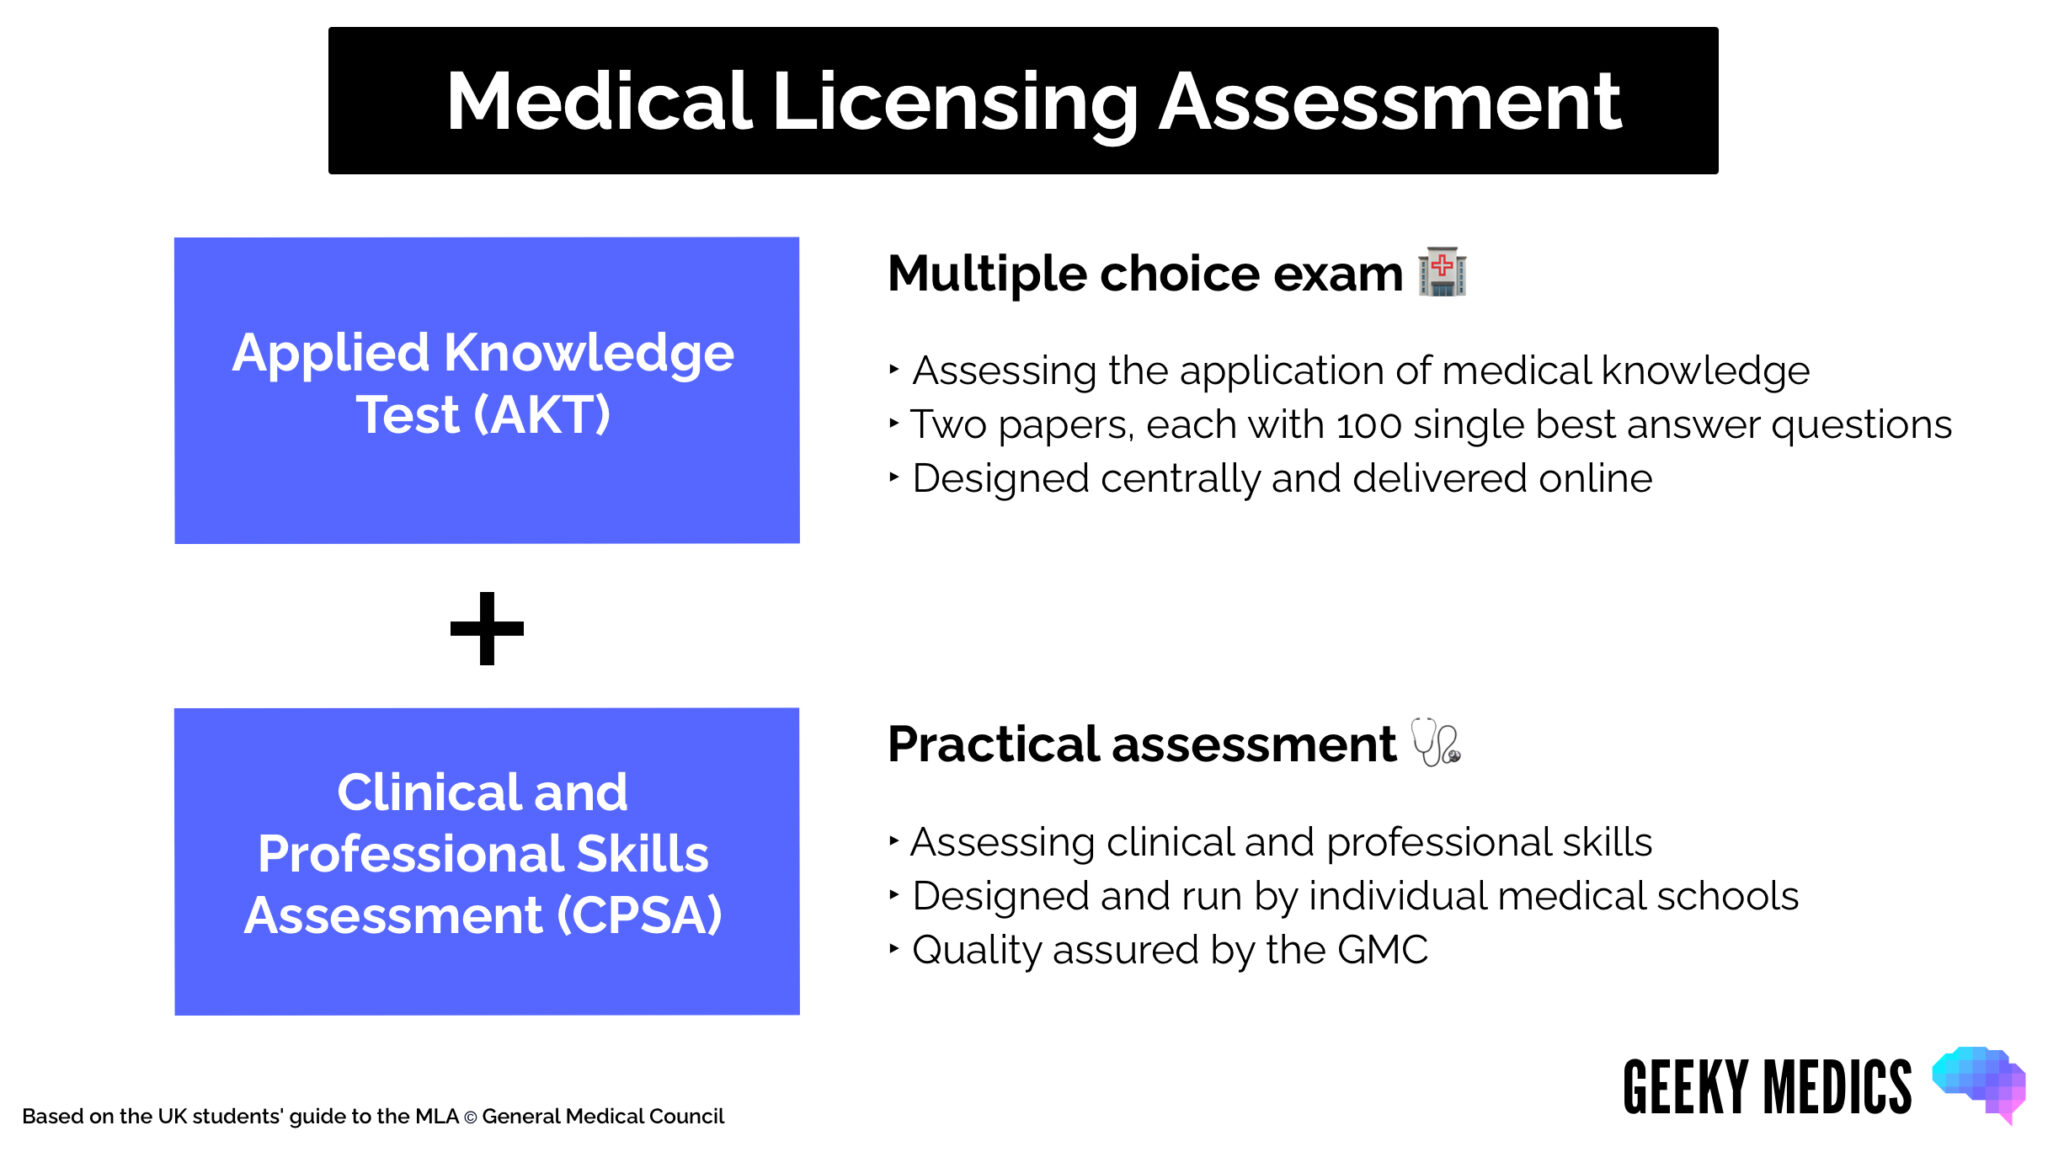 Structure of the UK Medical Licensing Assessment